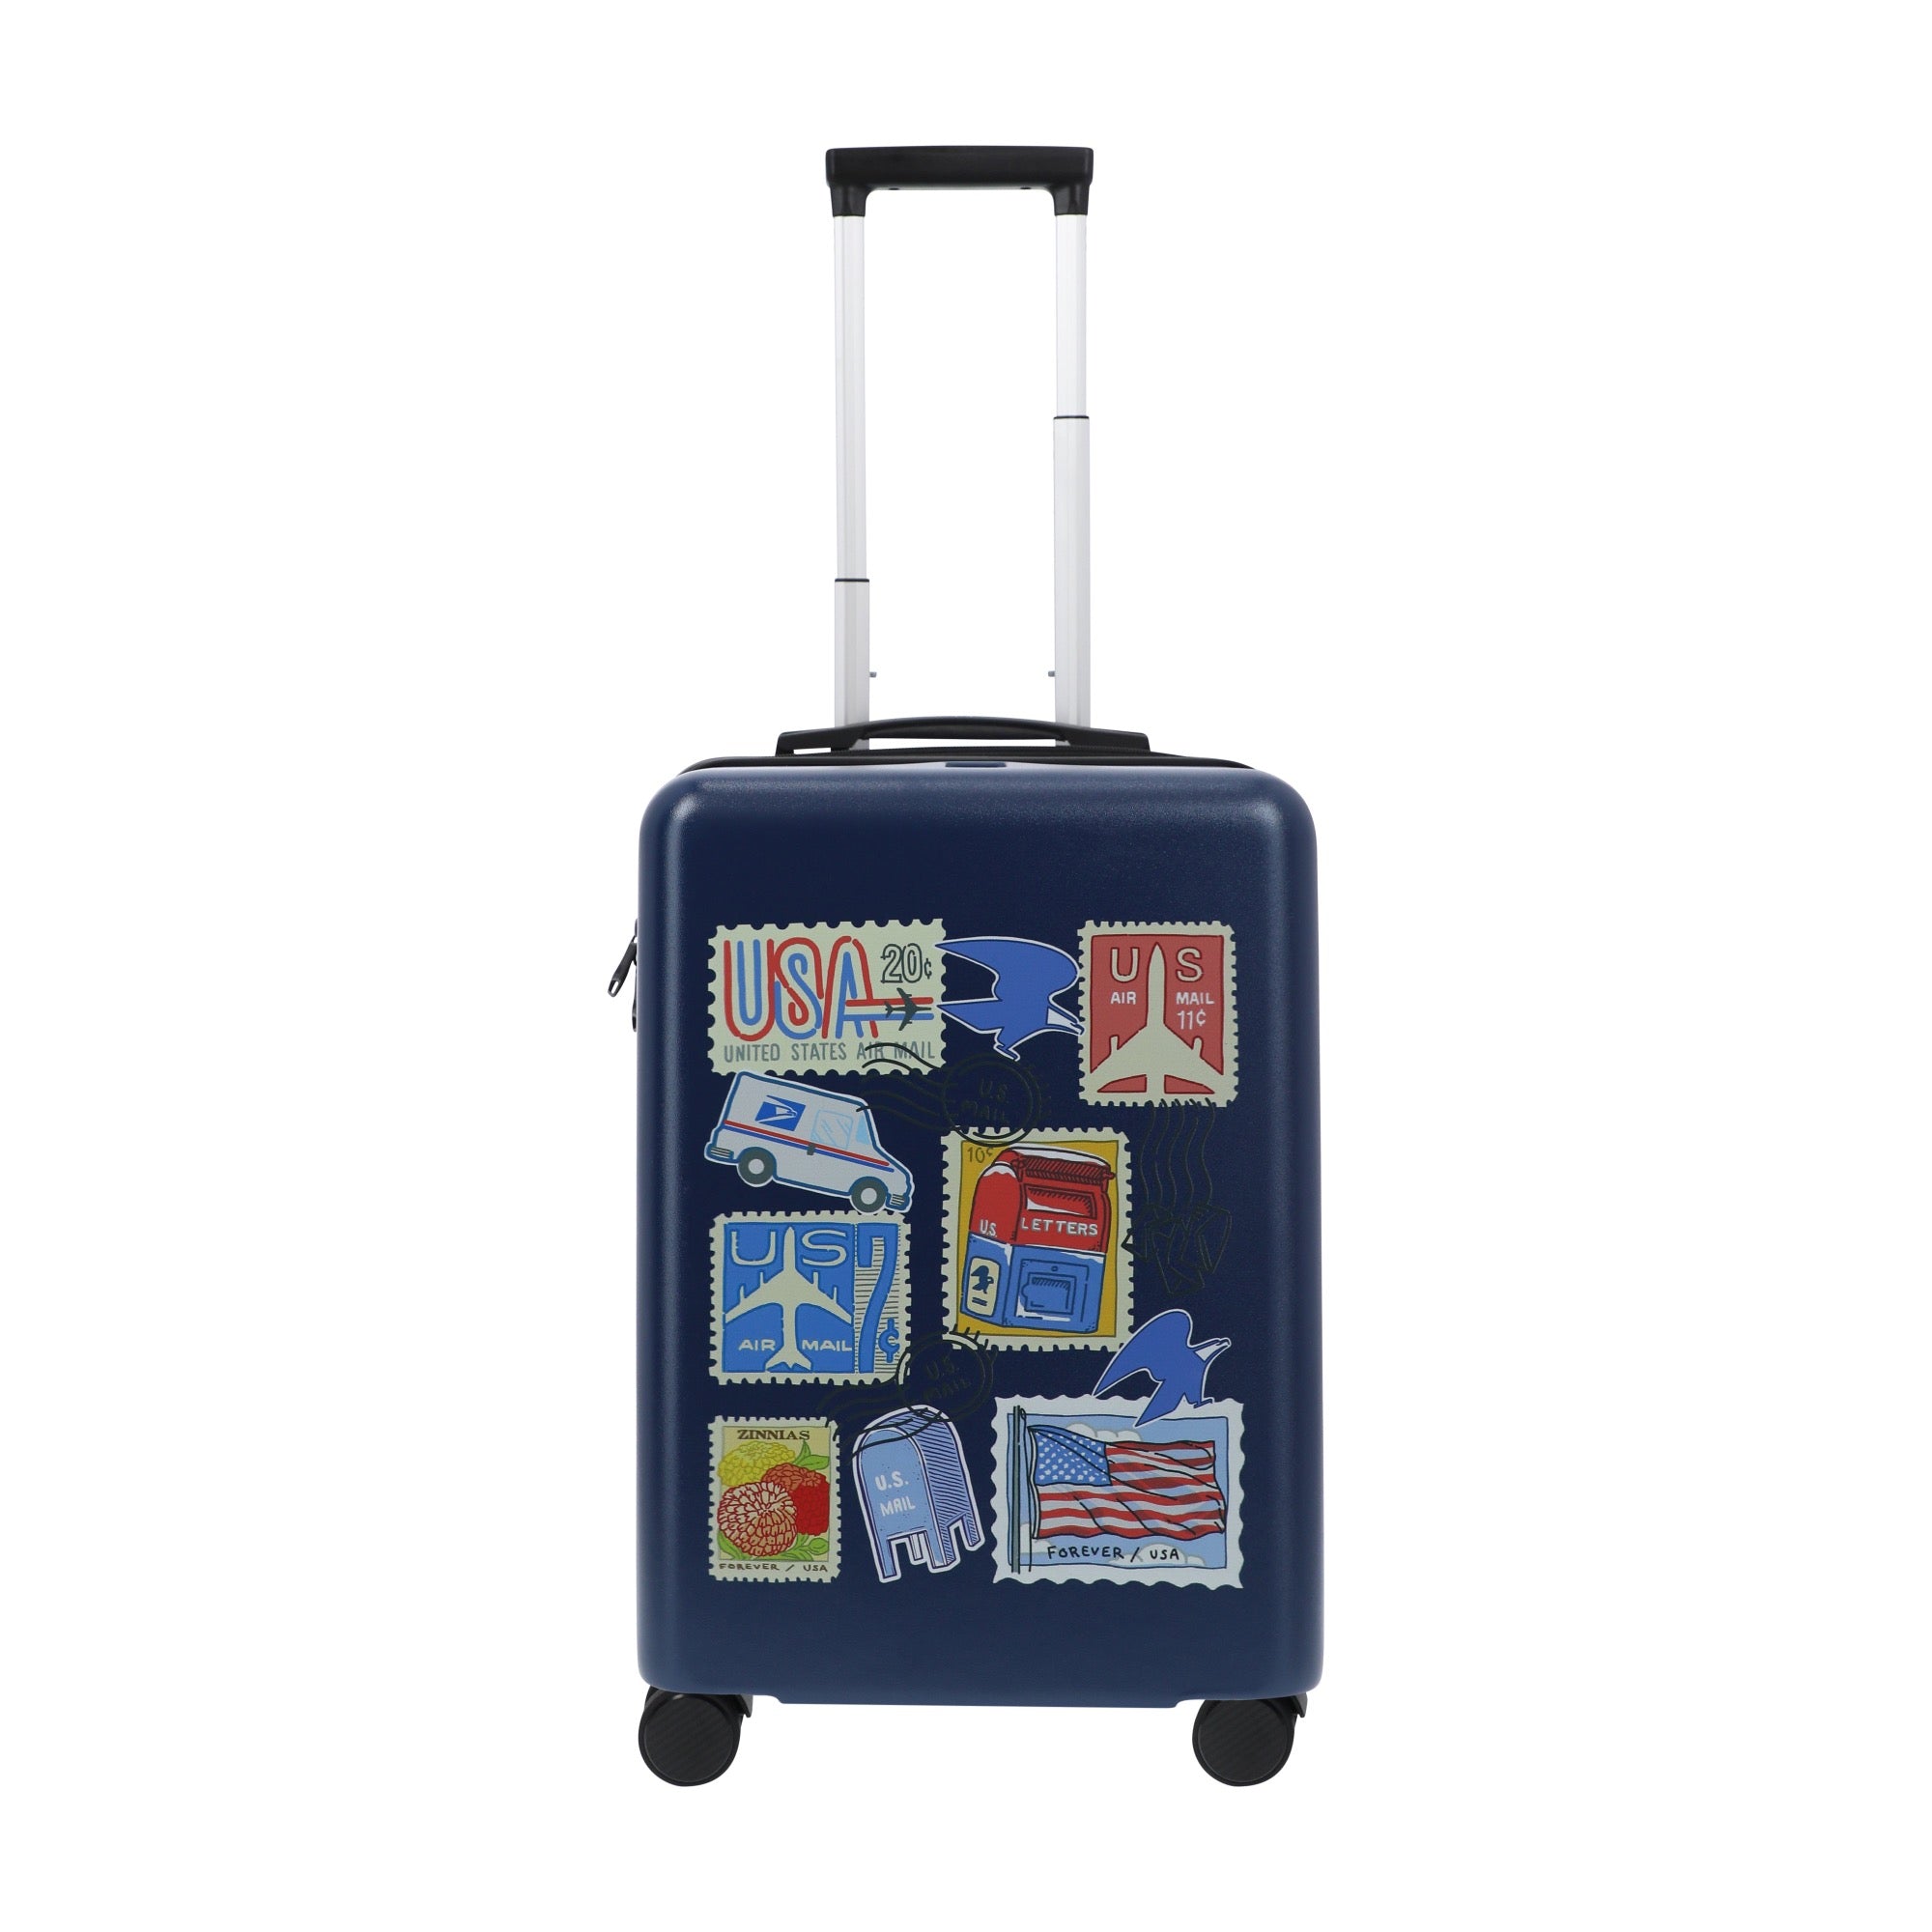 Navy blue USPS 22.5" carry-on spinner suitcase luggage by Ful